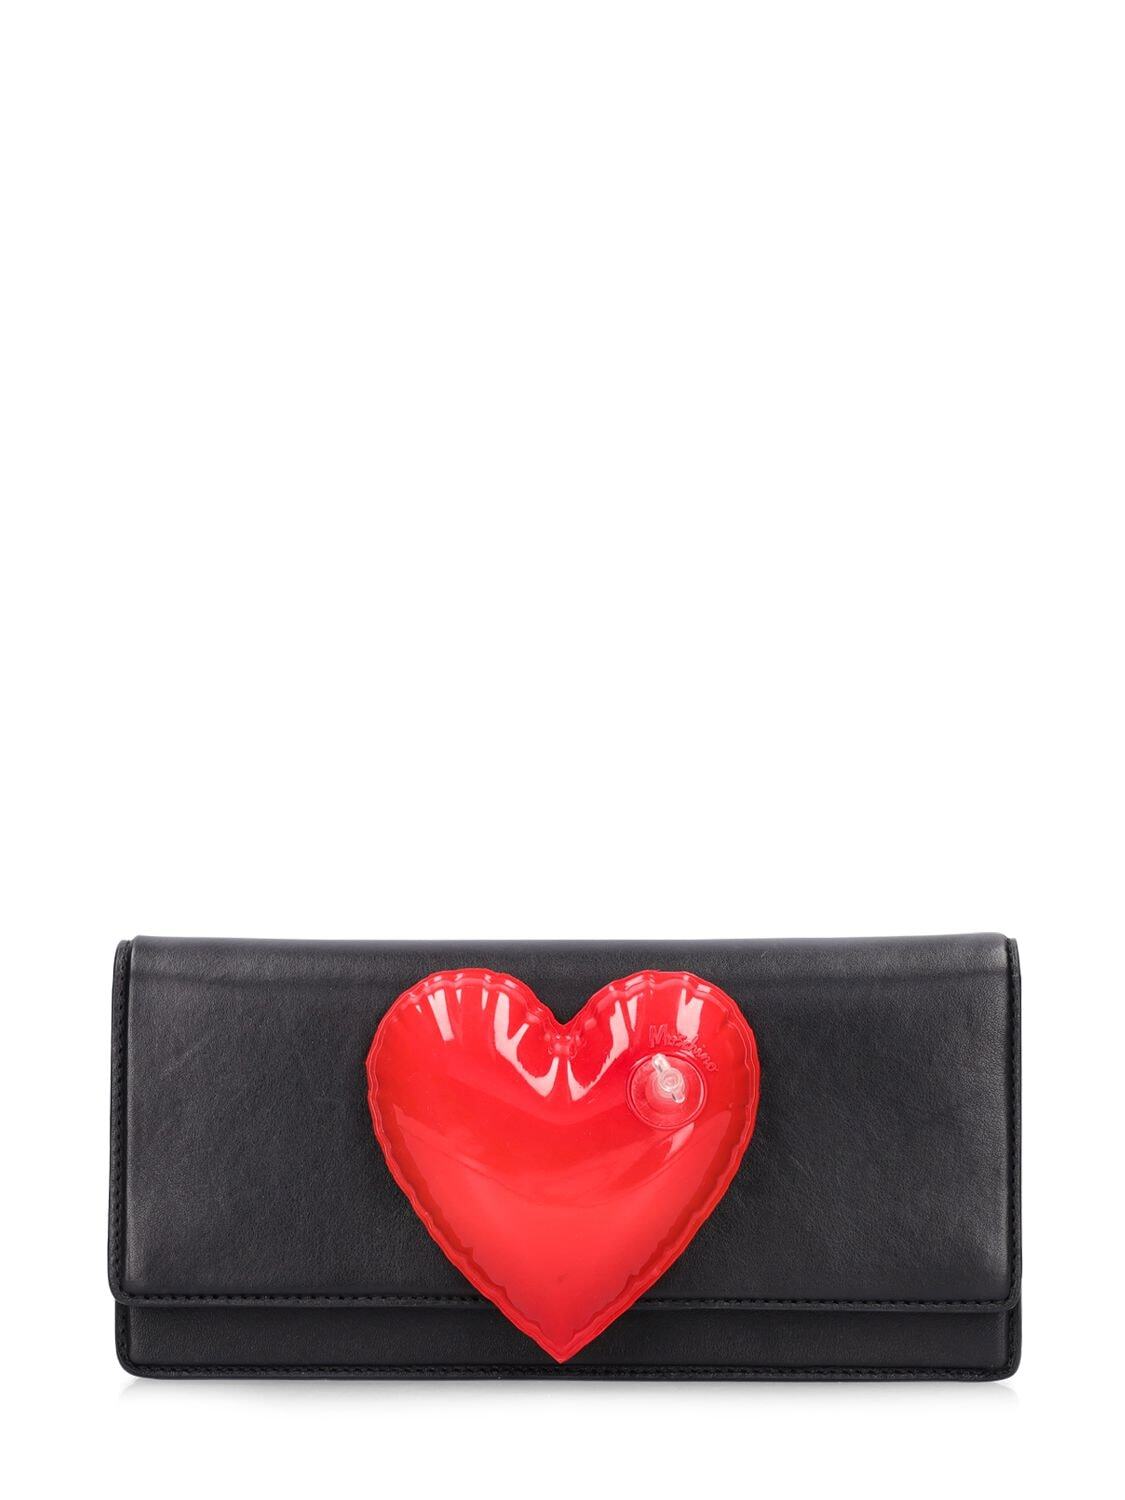 MOSCHINO Padded Heart Leather Clutch in black